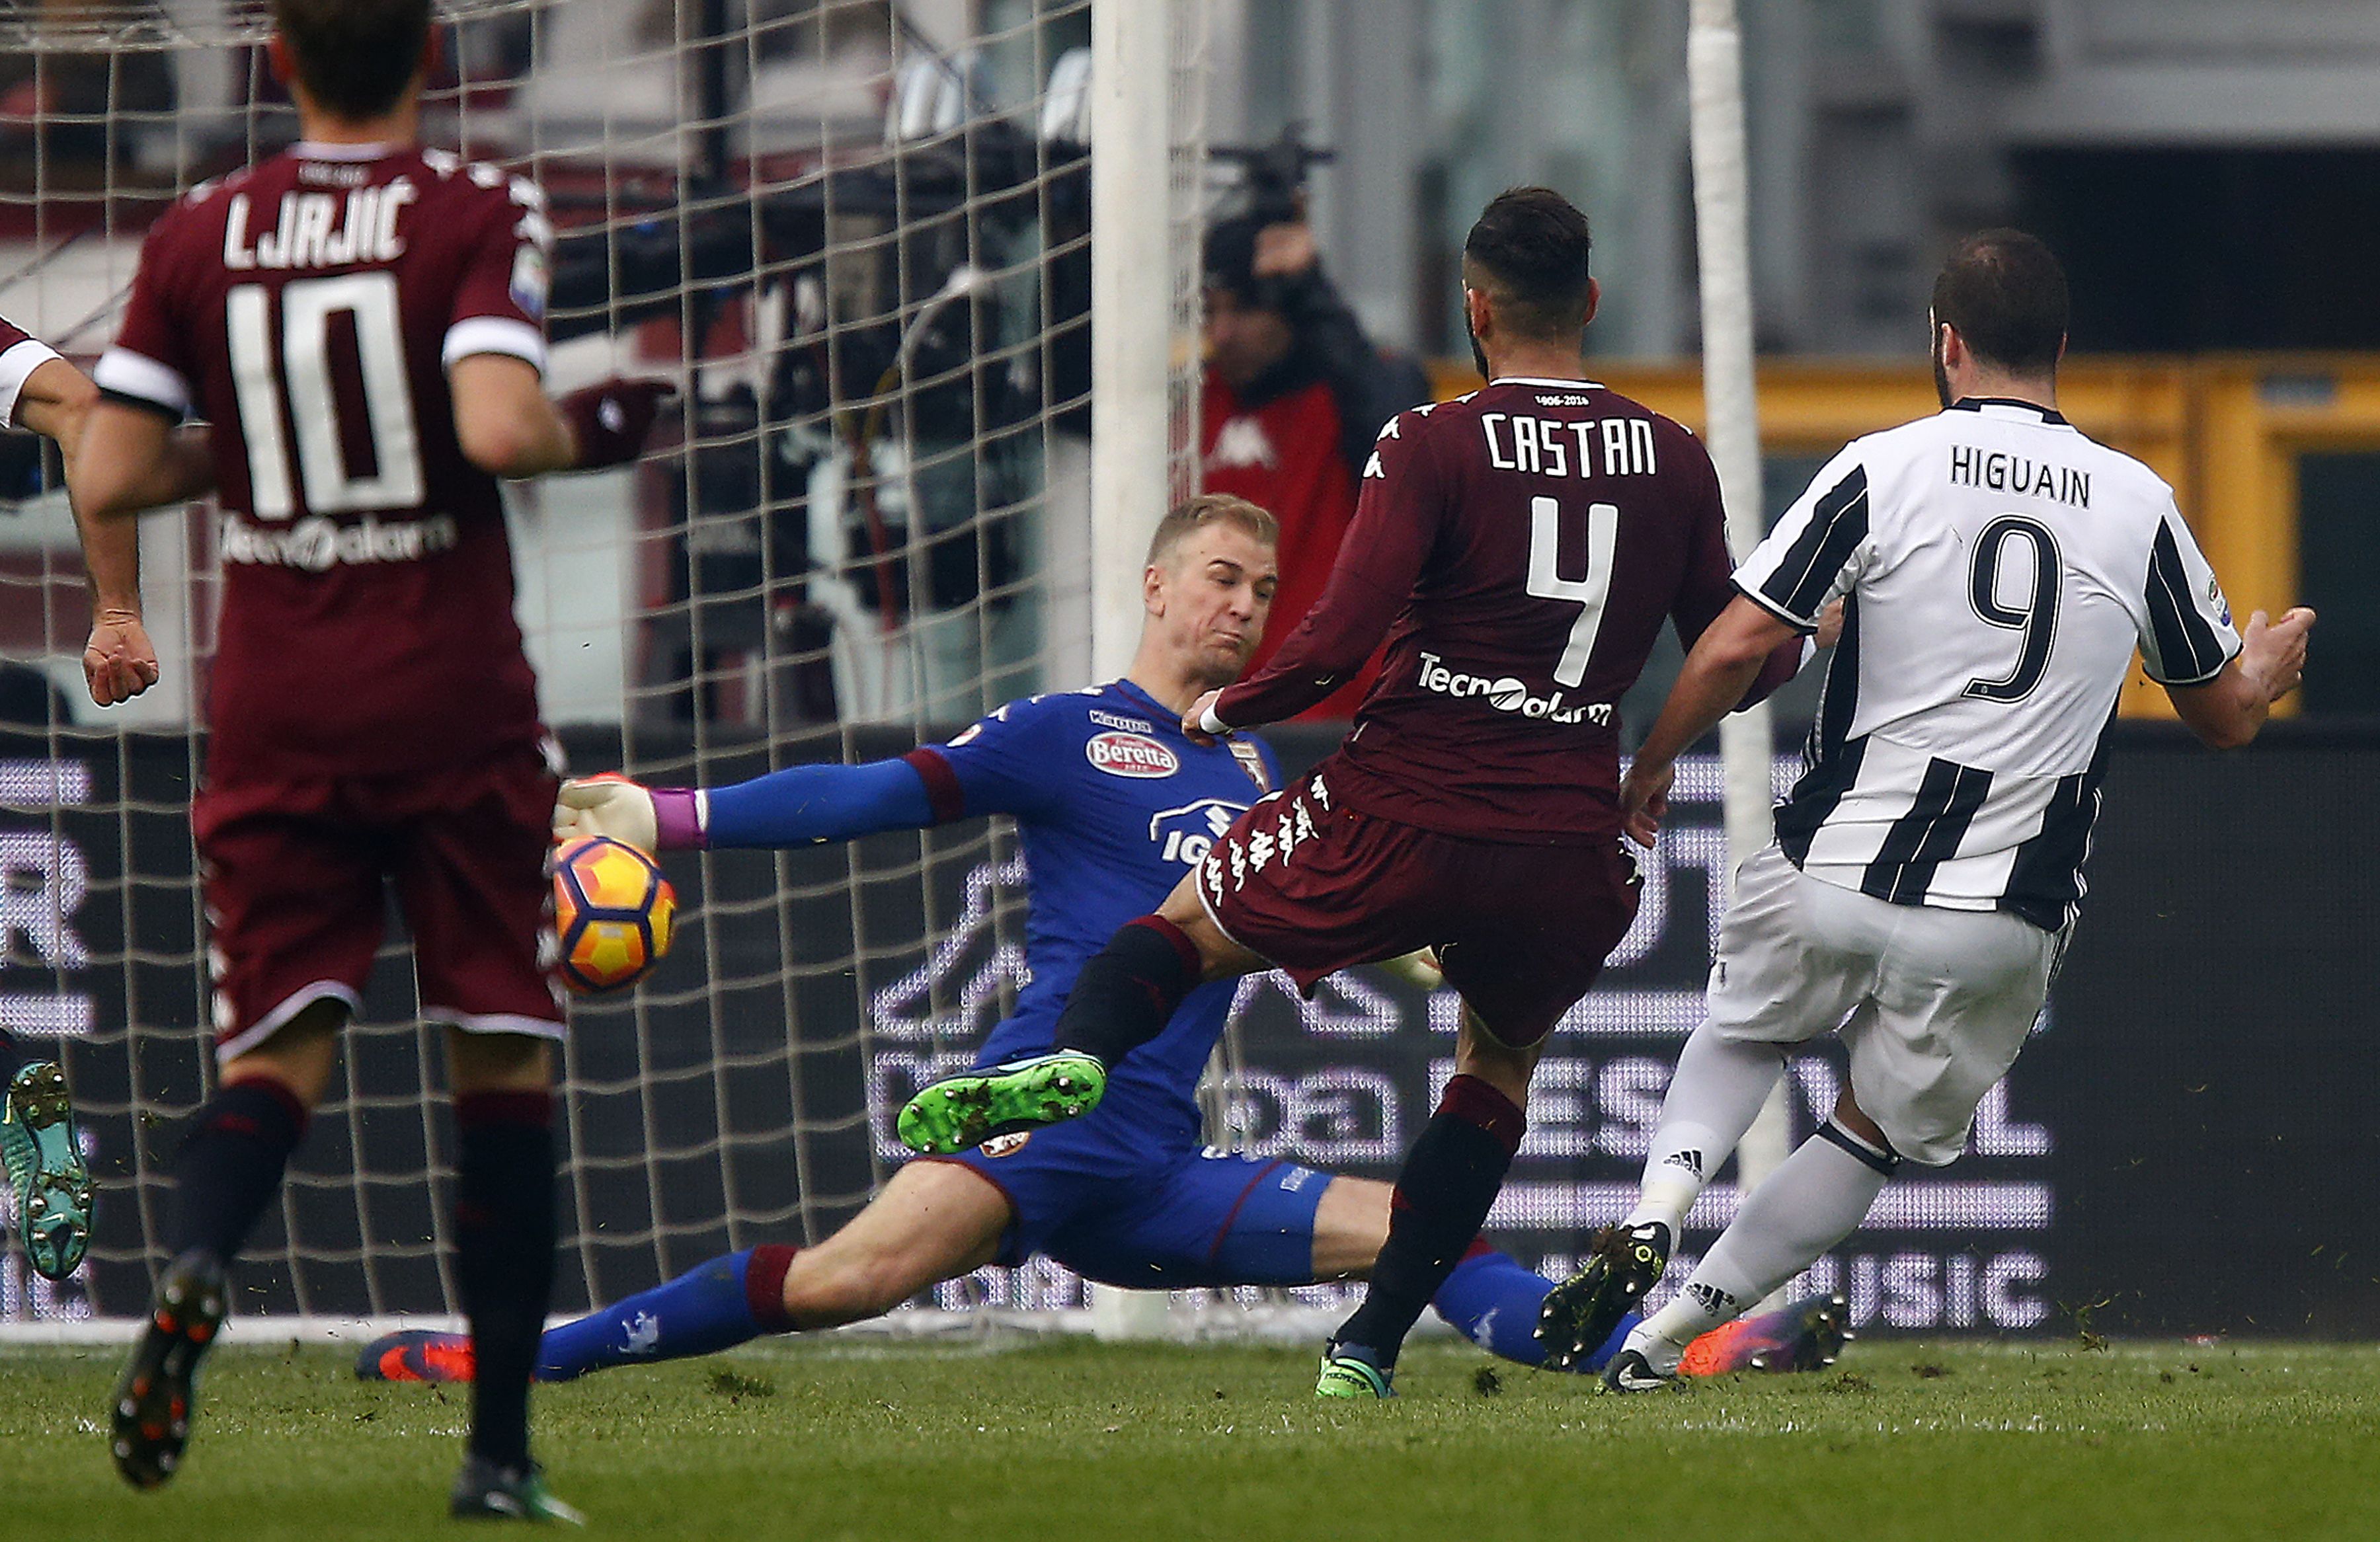 Juventus' forward Gonzalo Higuain from Argentina  (R) scores past Torino's English goalkeepter Joe Hart (2L) during the Italian Serie A football match between Torino and Juventus at the Grande Torino Stadium in Turin on December 11, 2016. / AFP / MARCO BERTORELLO        (Photo credit should read MARCO BERTORELLO/AFP/Getty Images)